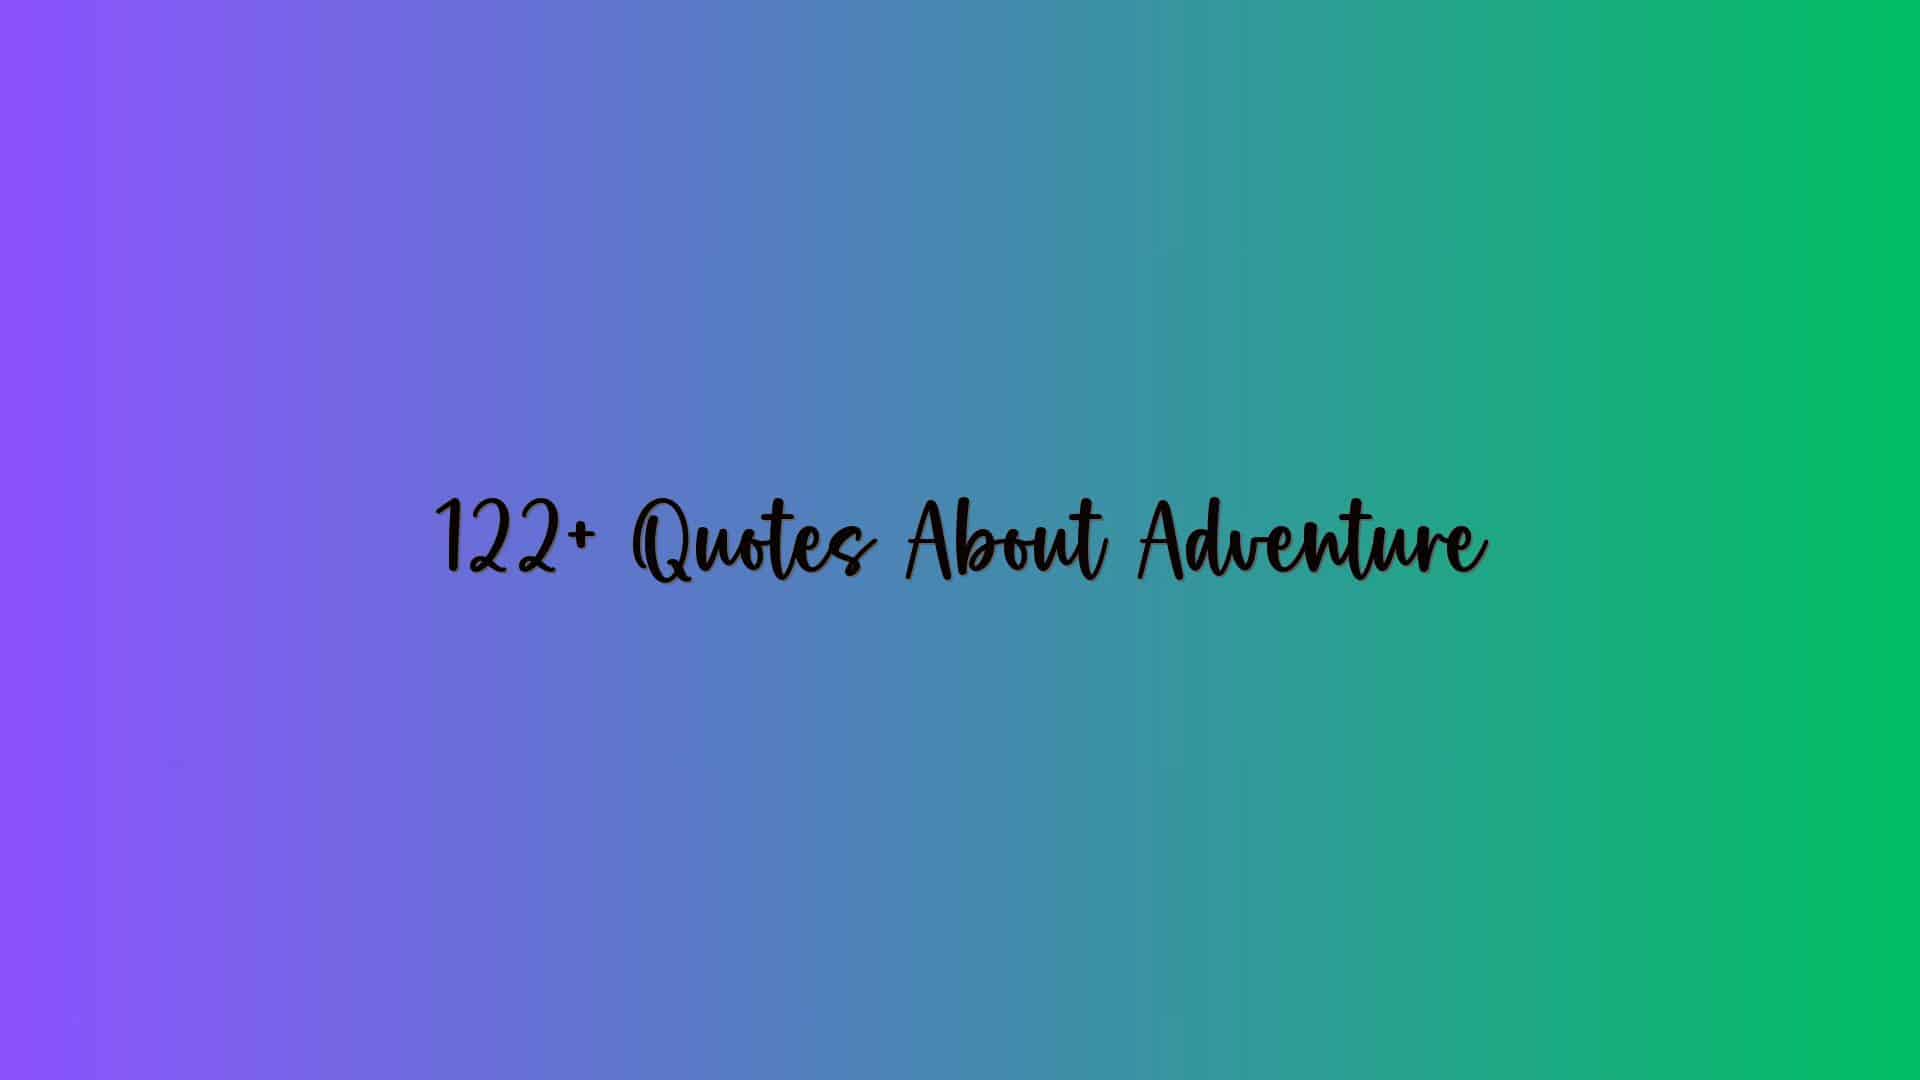 122+ Quotes About Adventure